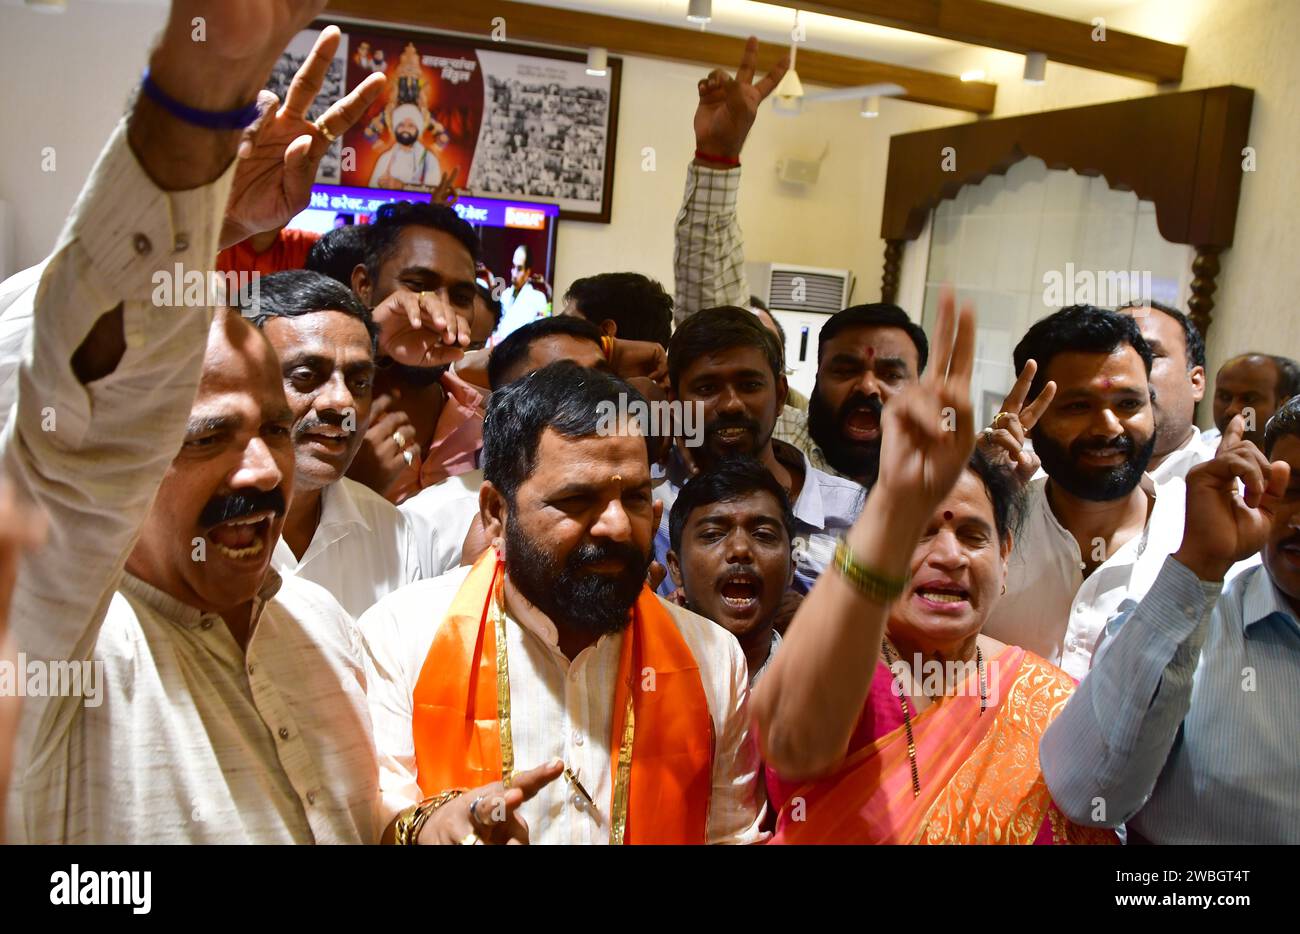 MUMBAI, INDIA - JANUARY 10: Shiv Sena (Shinde faction) MLA Bharat Gogawale with party leaders celebrate after the Shiv Sena MLA disqualification case verdict, at Balasaheb Bhavan on January 10, 2024 in Mumbai, India. The Maharashtra Legislative Assembly Speaker Rahul Narwekar today held that Eknath Shinde led faction was the real Shiv Sena when the rival faction emerged within the party on June 22, 2022. He has refused to disqualify any member from both the factions, led by Shinde and Uddhav Thackeray. Both the factions had filed 34 petitions against each other before the speaker in 2022, se Stock Photo